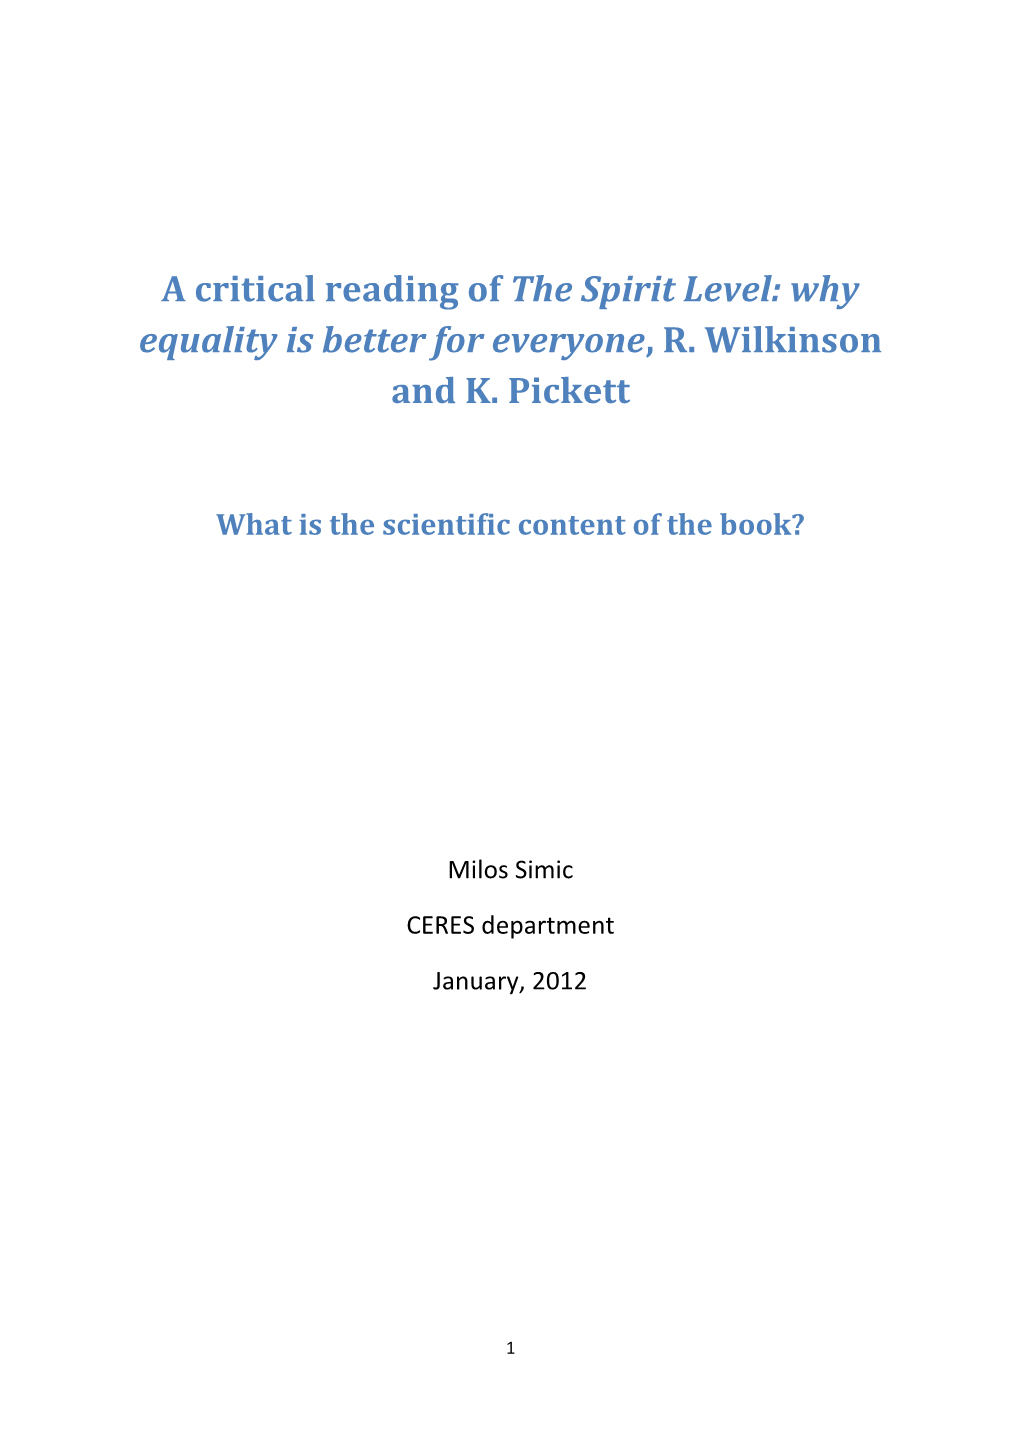 A Critical Reading of the Spirit Level: Why Equality Is Better for Everyone, R